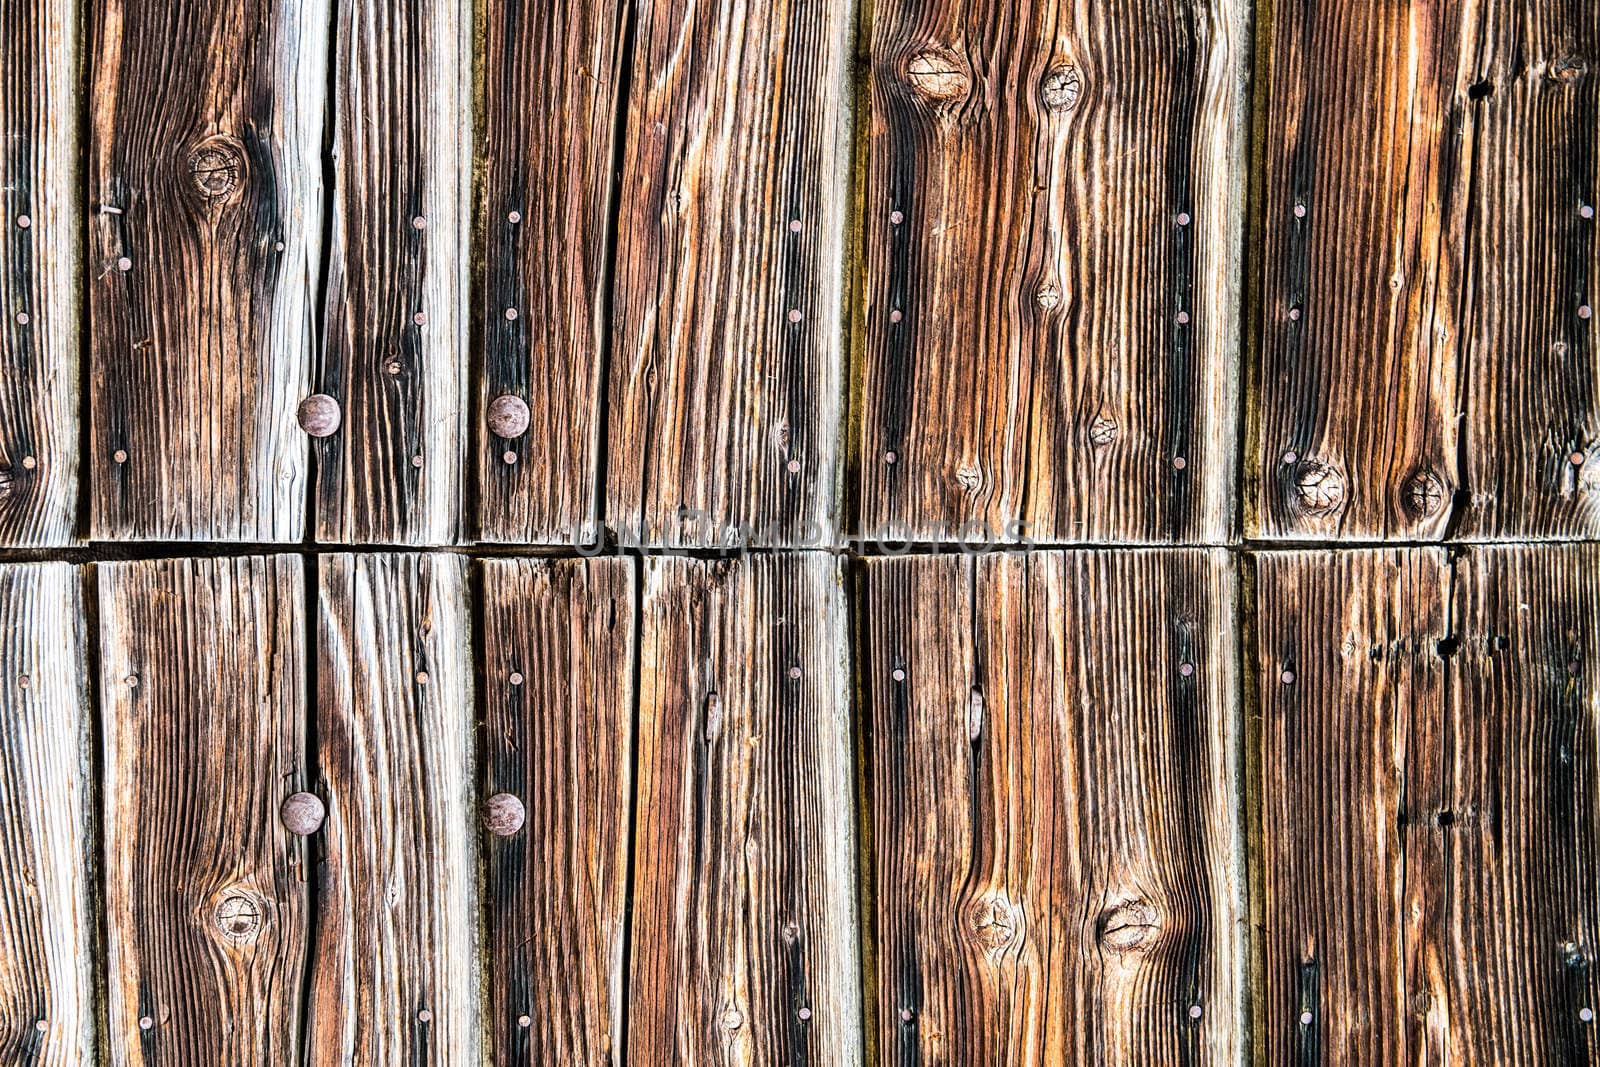 Texture formed by the wooden wall of an old barn.